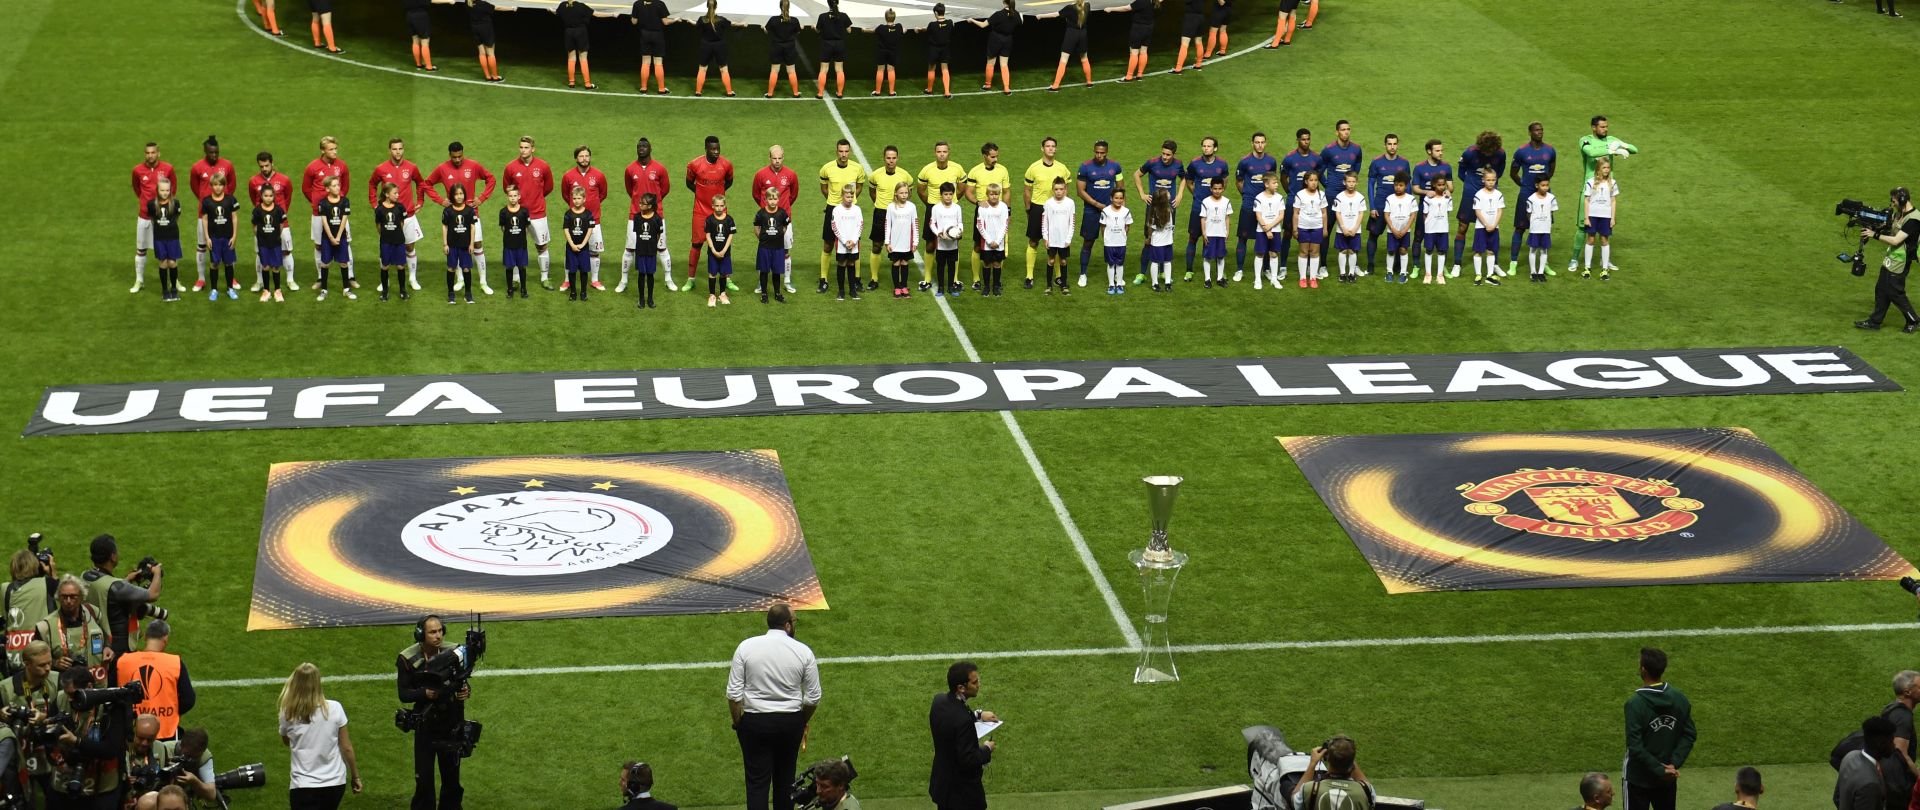 epa05987315  The teams line up before the UEFA Europa League final between Ajax Amsterdam and Manchester United at Friends Arena in Stockholm, Sweden, 24 May 2017.  EPA/Pontus Lundahl SWEDEN OUT